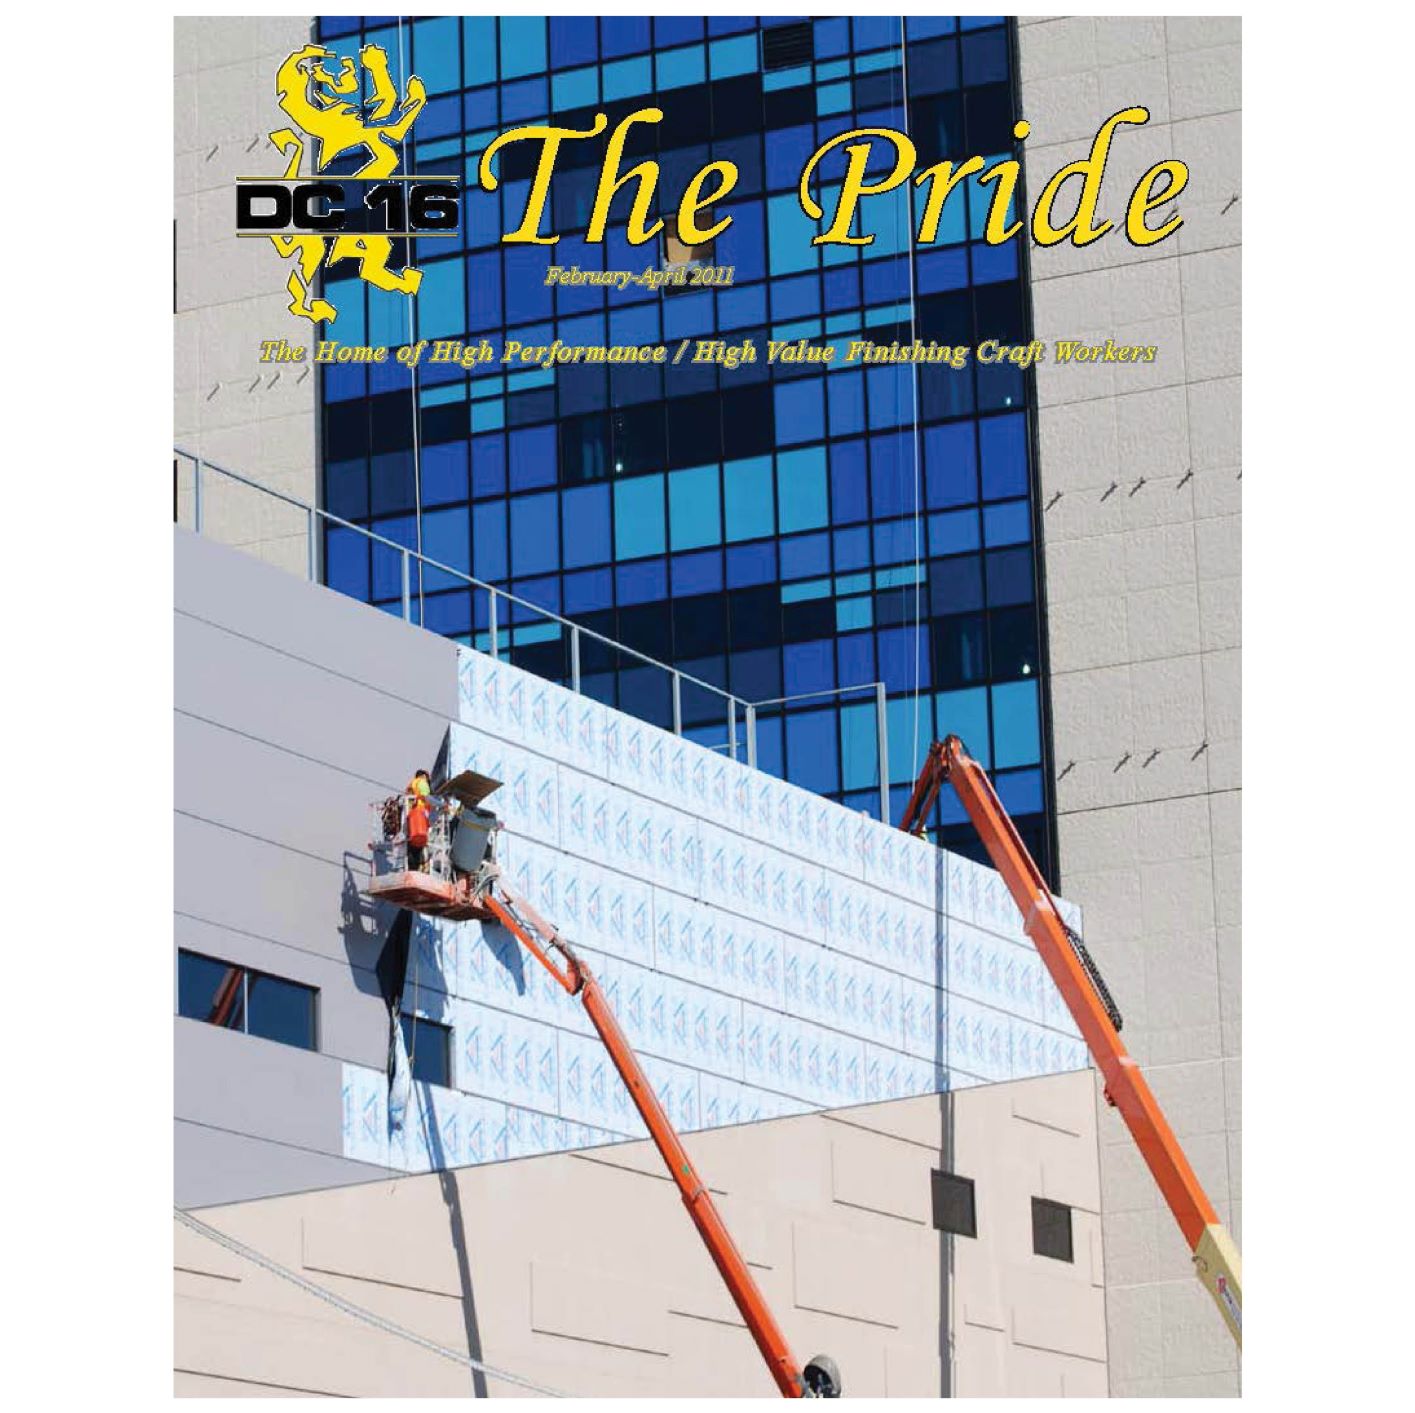 Image from the Gallery: The Pride February – April 2011